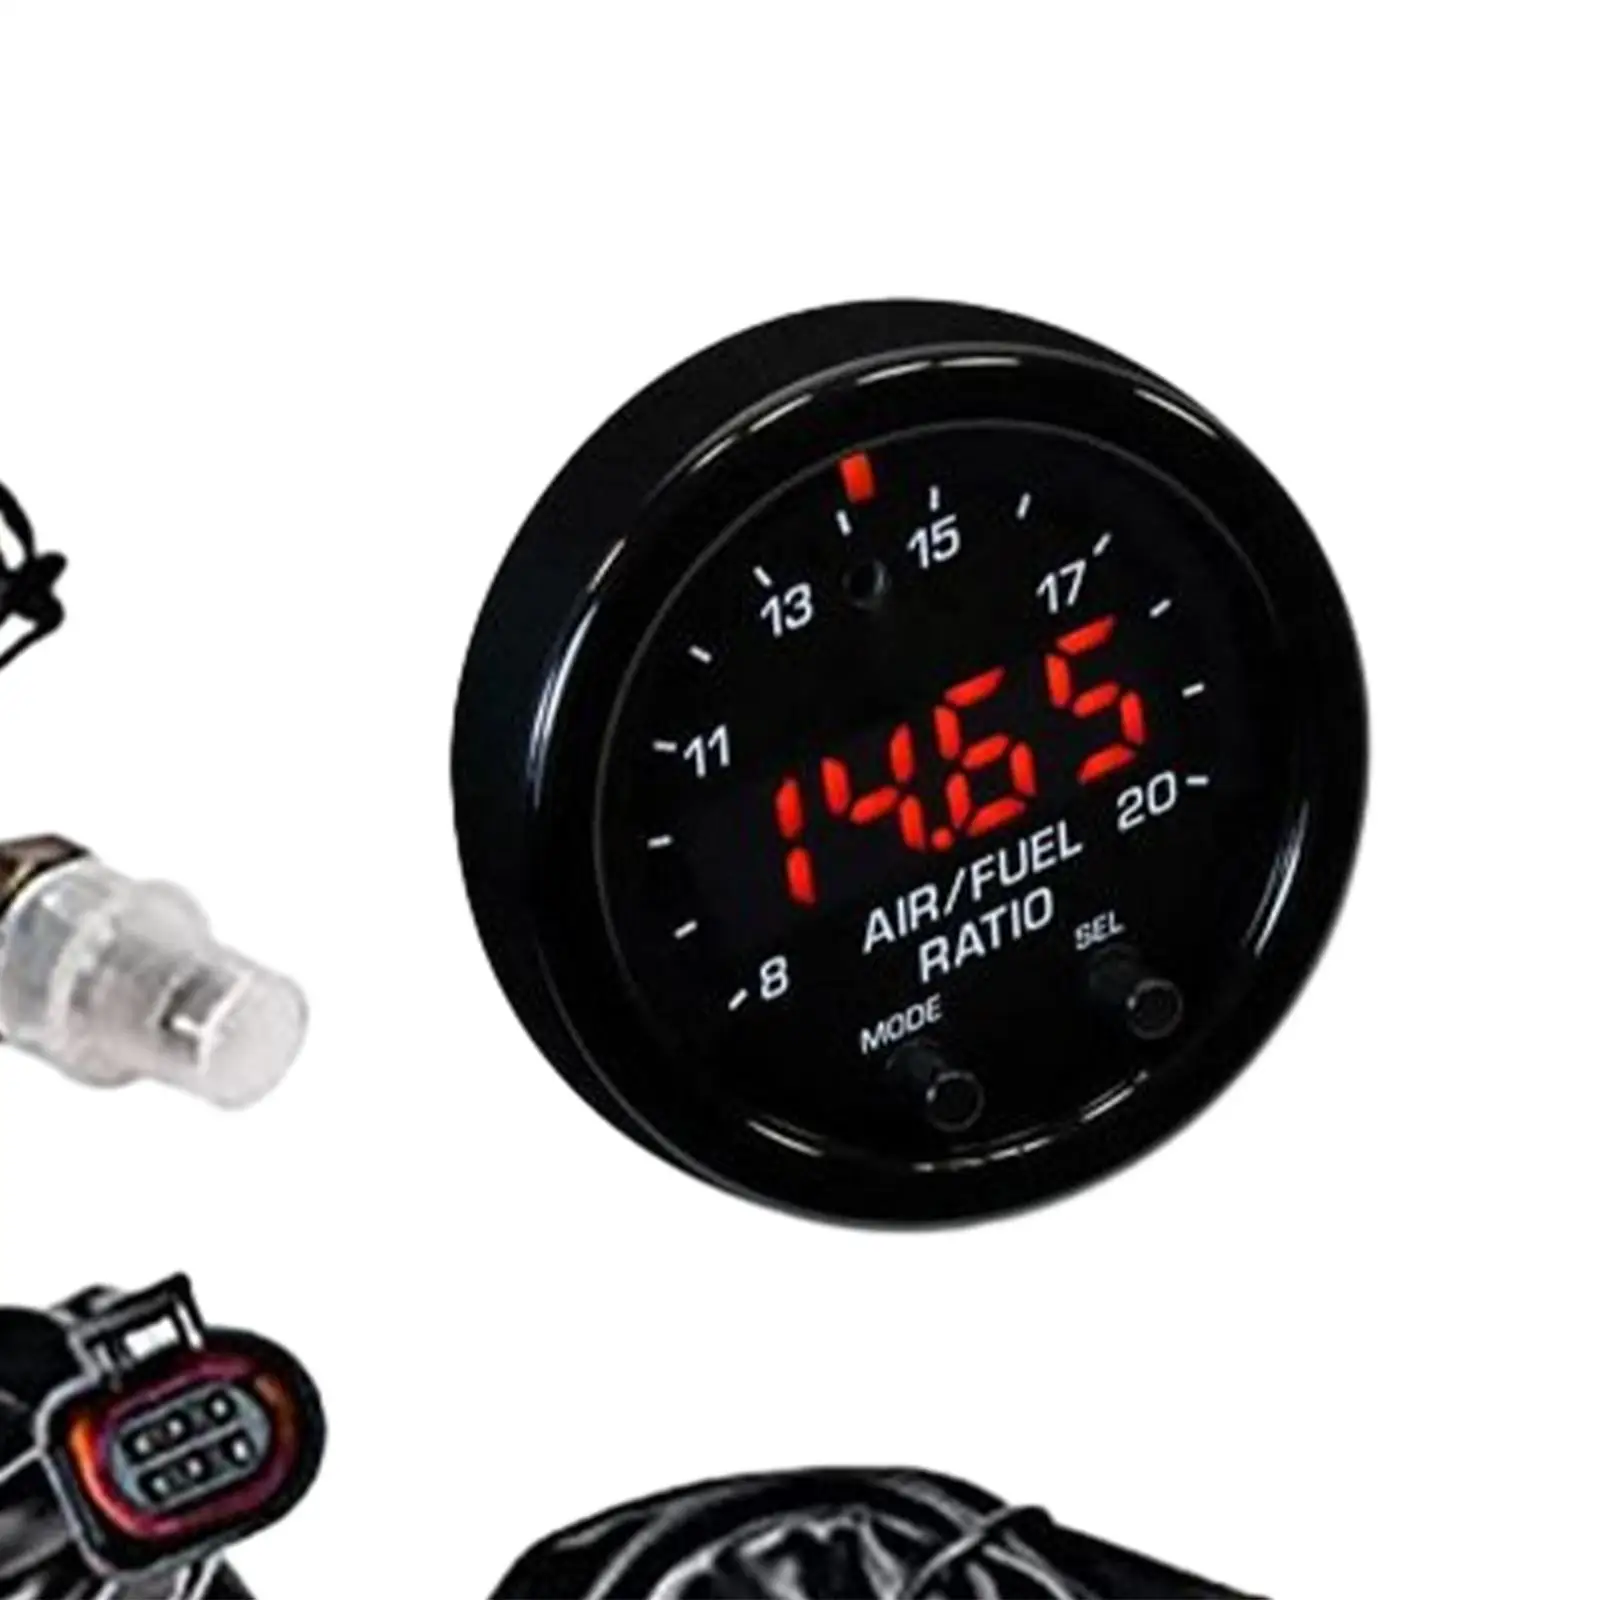 30-0300 x Series Afr Gauge Set Repair Parts Right Out of The Box Replacement Uego Air Fuel Ratio Gauge Set Easy Installation